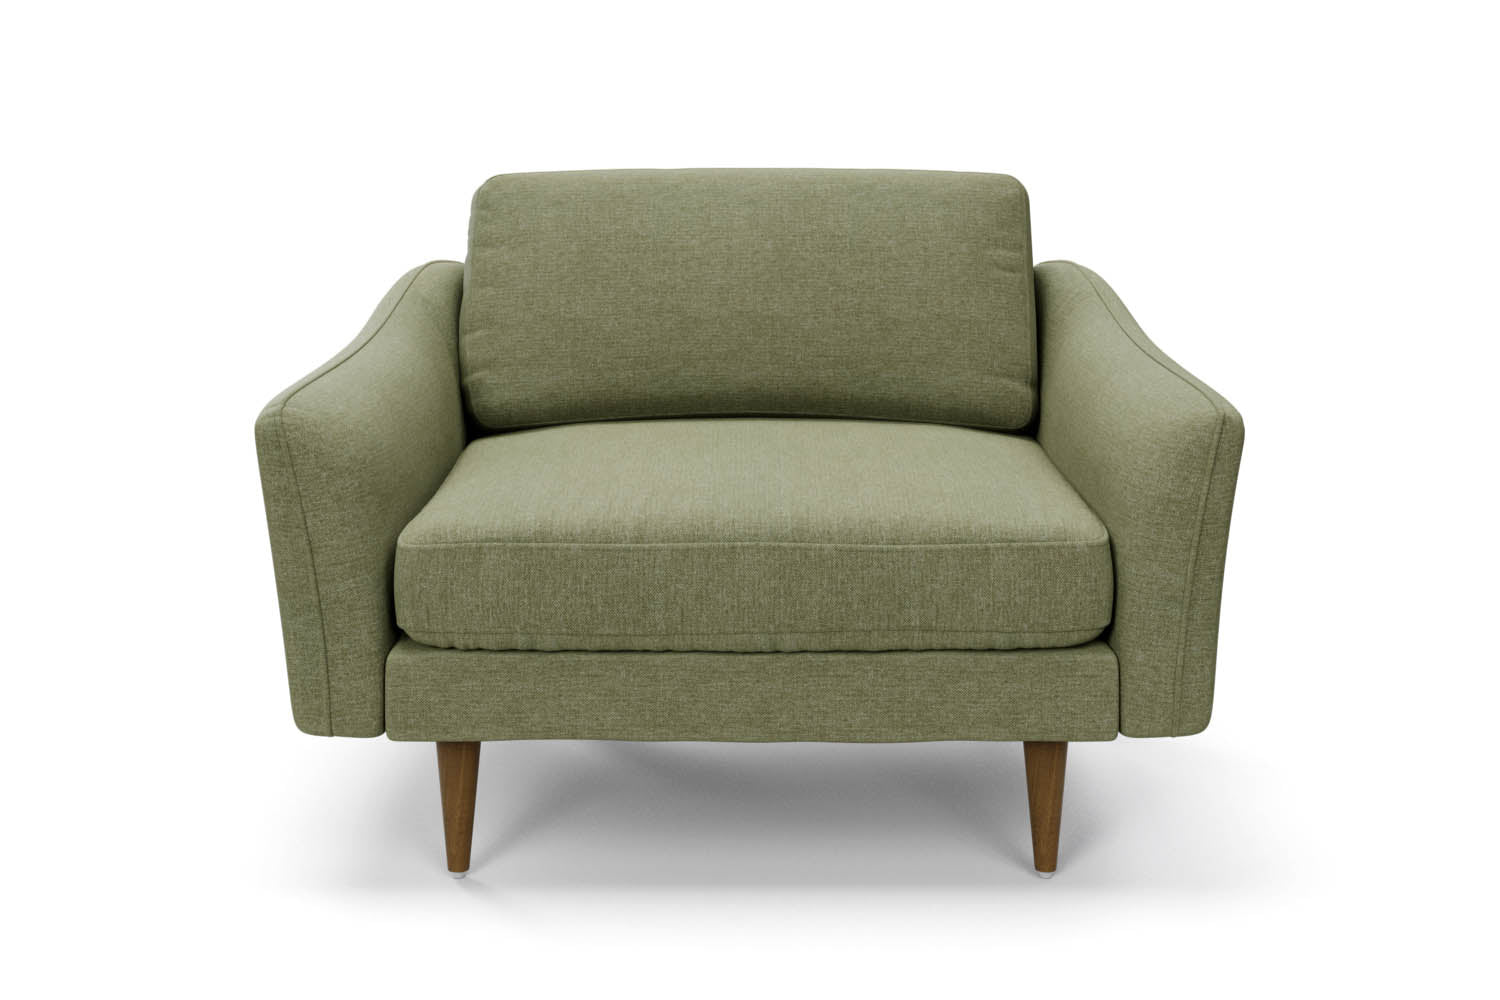 The Rebel Snuggler Sofa in Sage with brown legs front variant_40886316400688